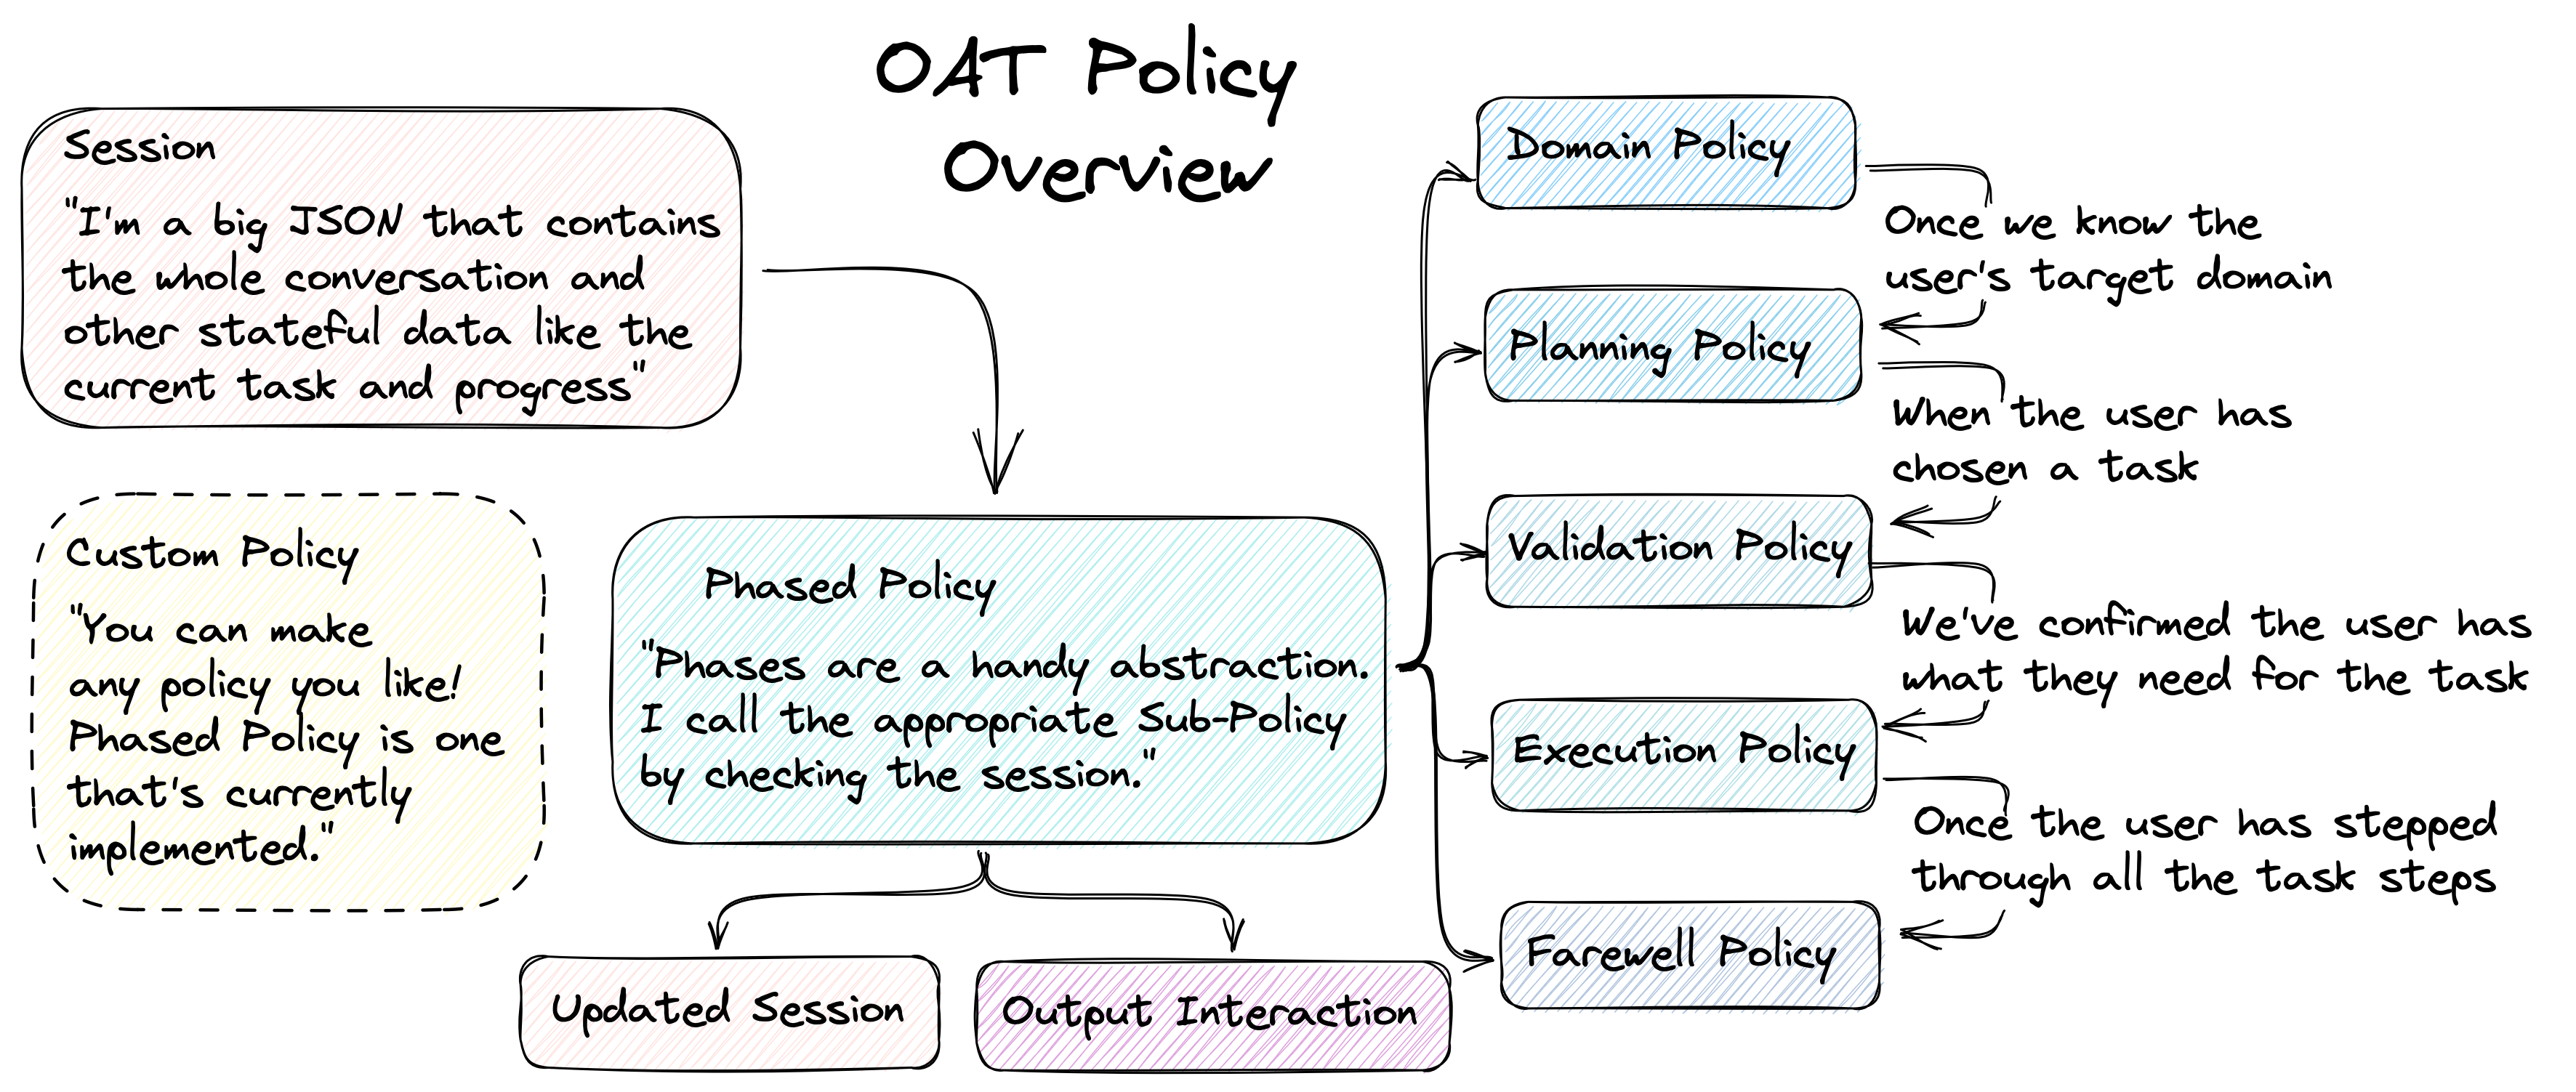 OAT system overview